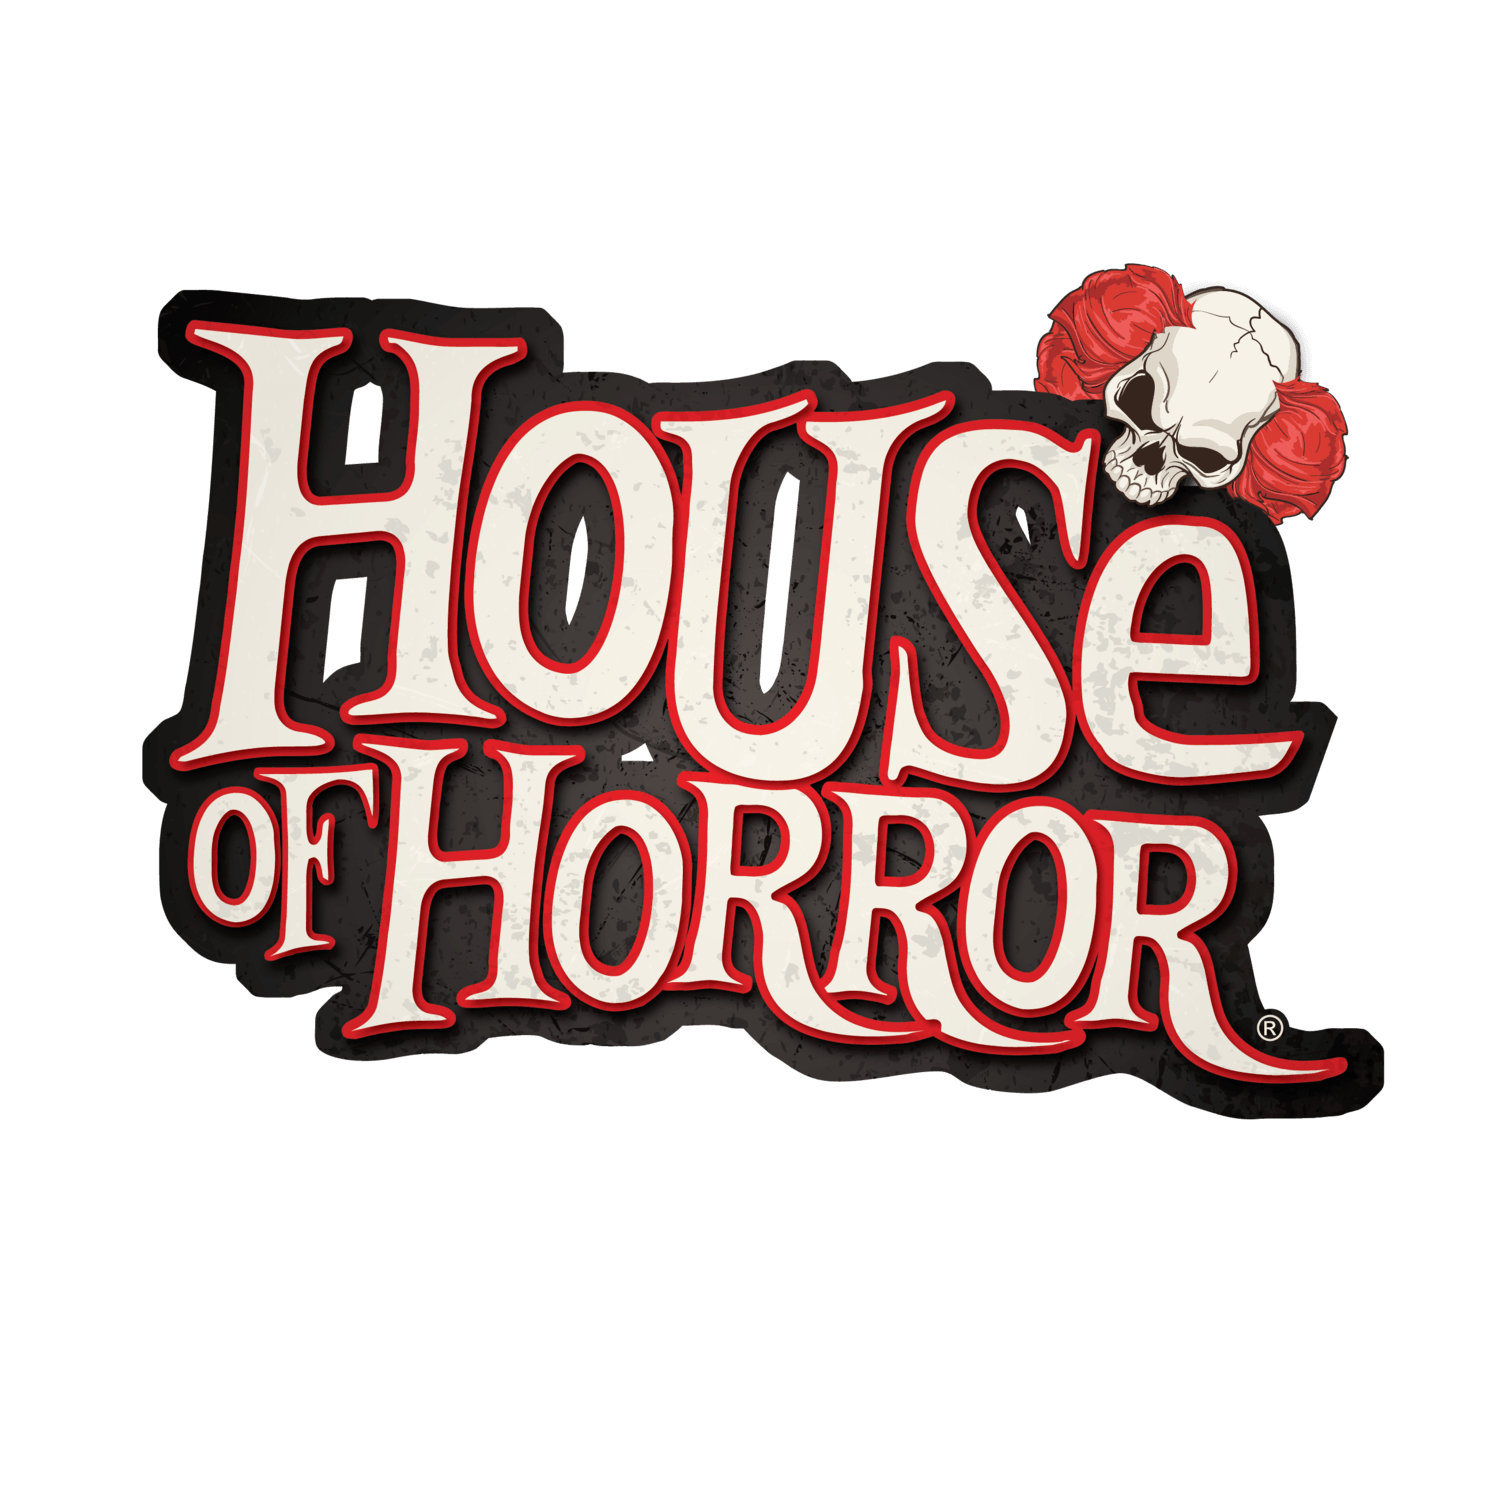 Scary Ford Logo - House of Horror